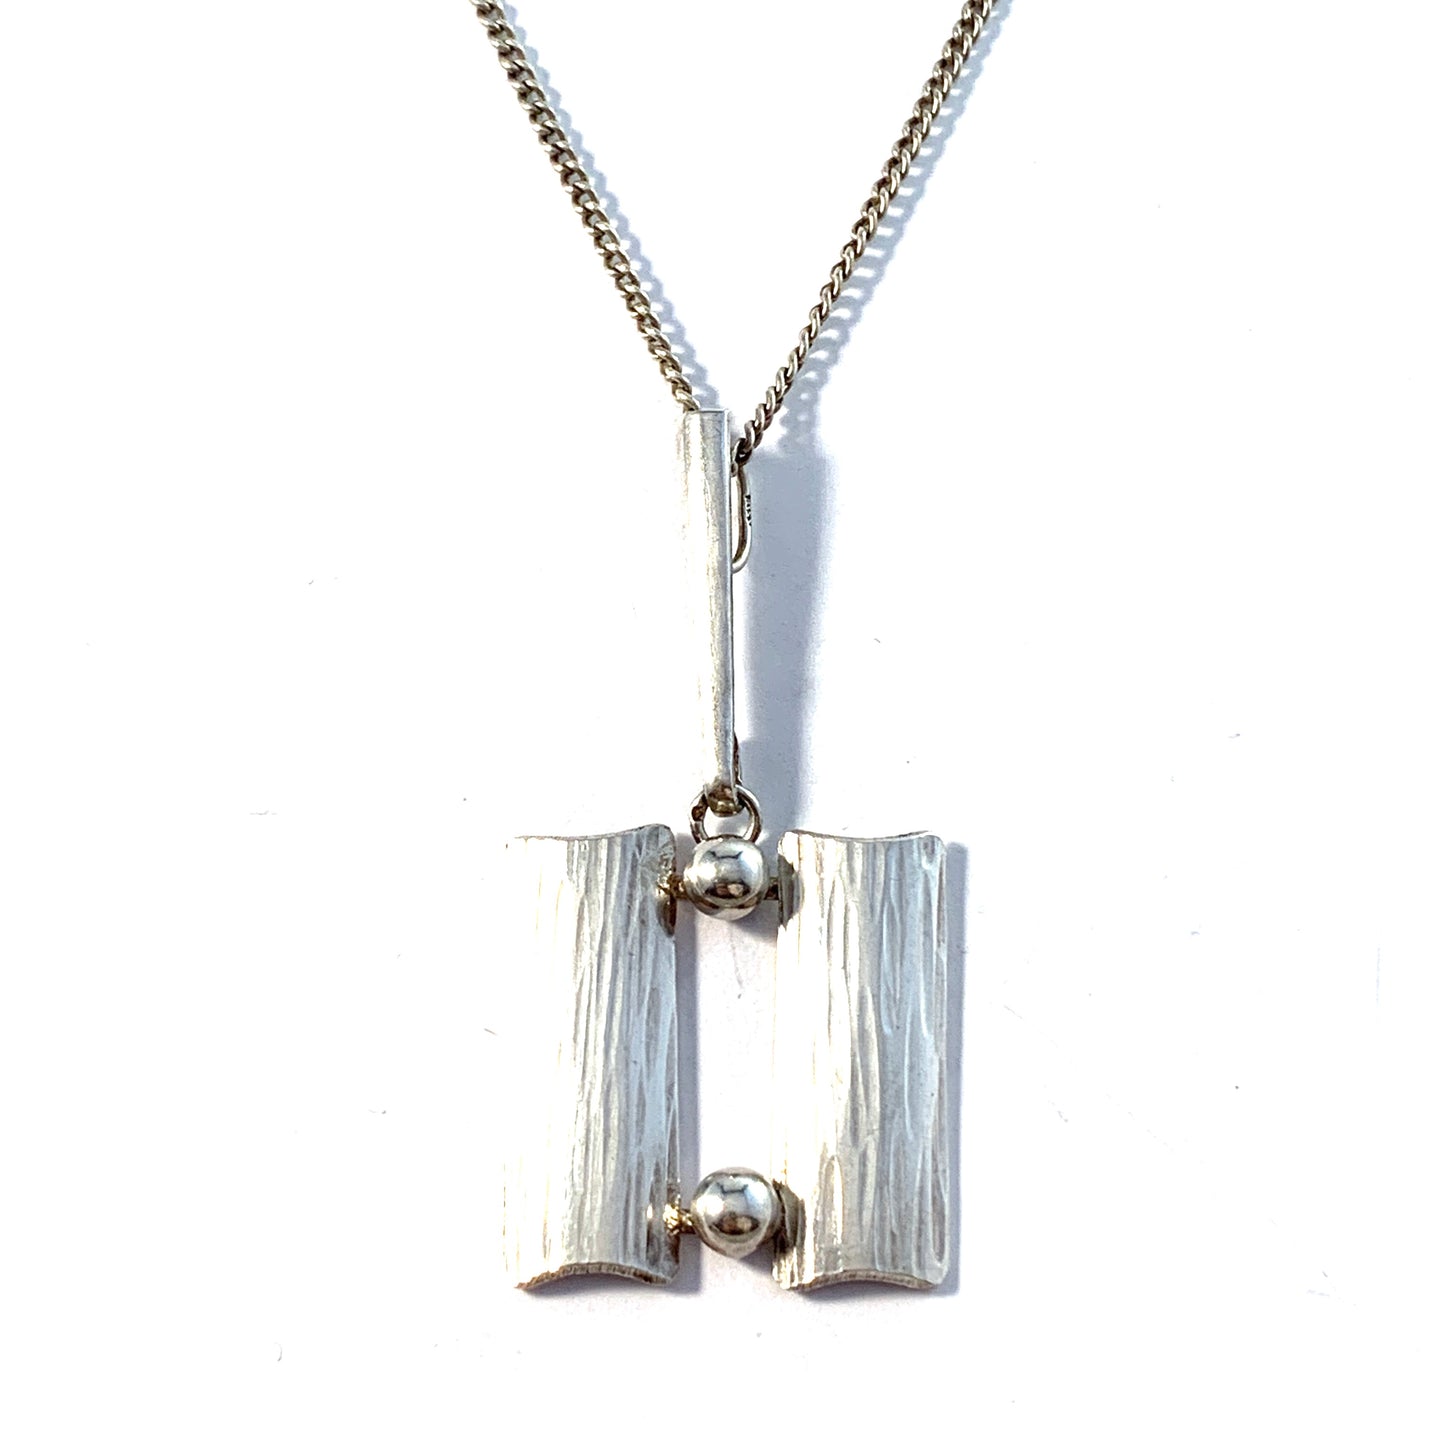 Germany 1960-70s Solid 835 Silver Pendant Long Chain Necklace.